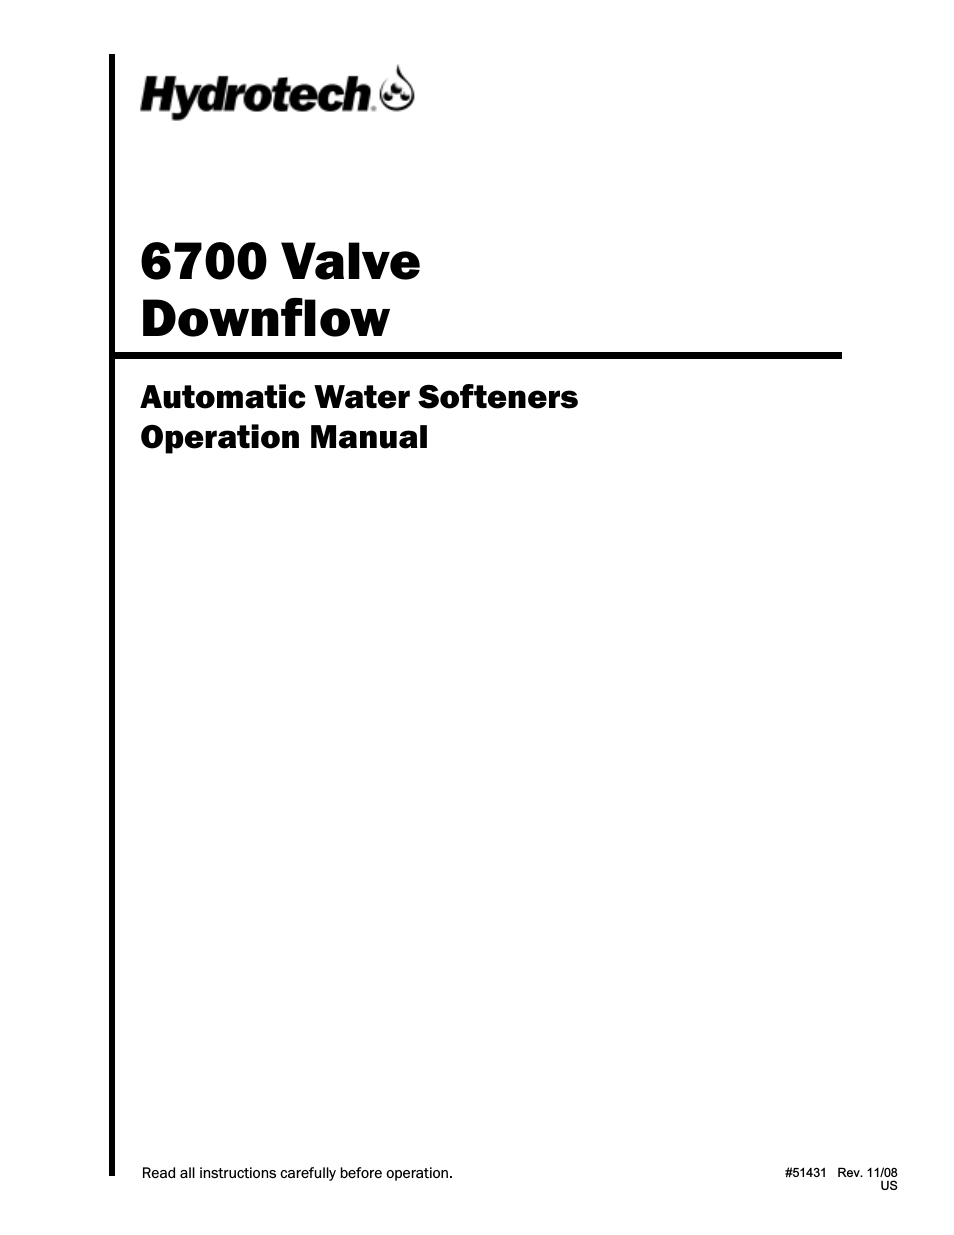 6700 Valve Downflow Automatic Water Softeners Operation Manual